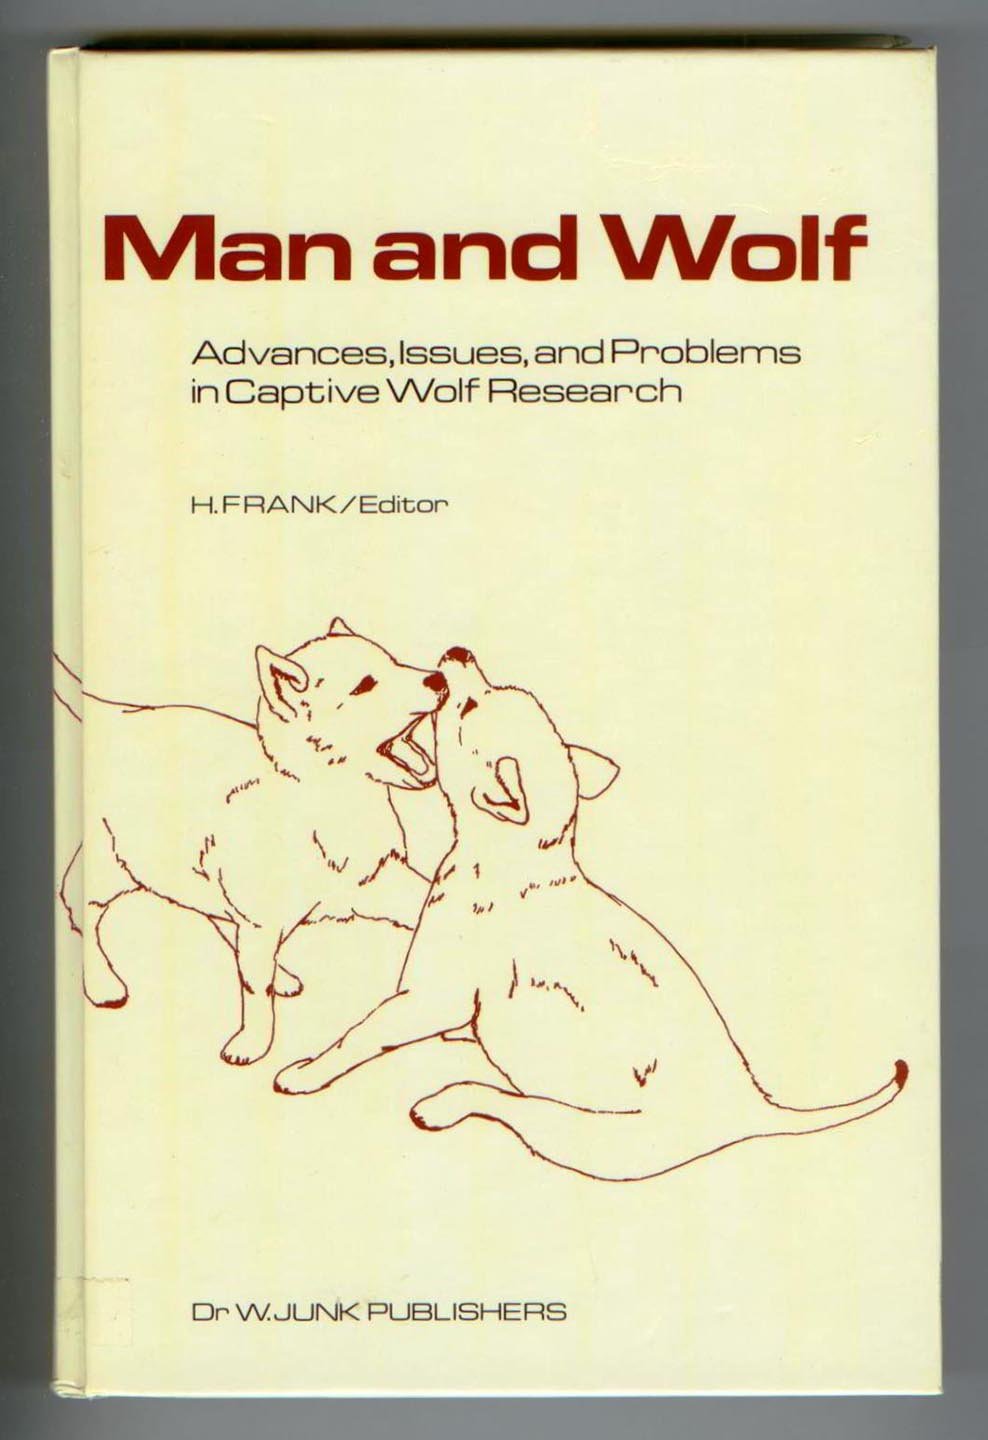 Man and Wolf: Advances, Issues, and Problems in Captive Wolf Research